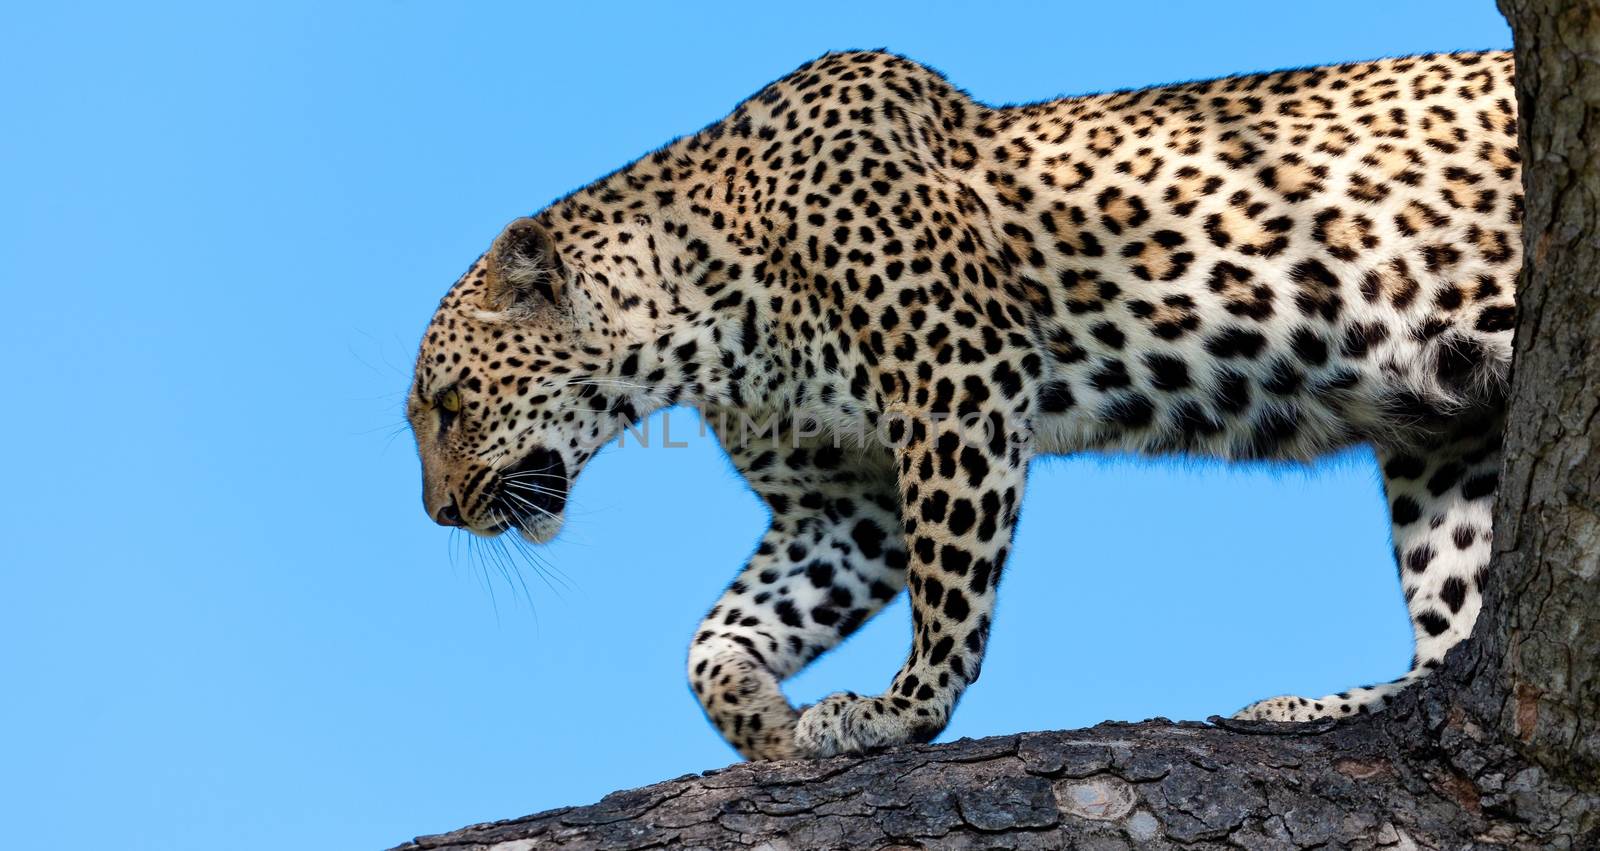 leopard in National Park in Tanzania by moizhusein